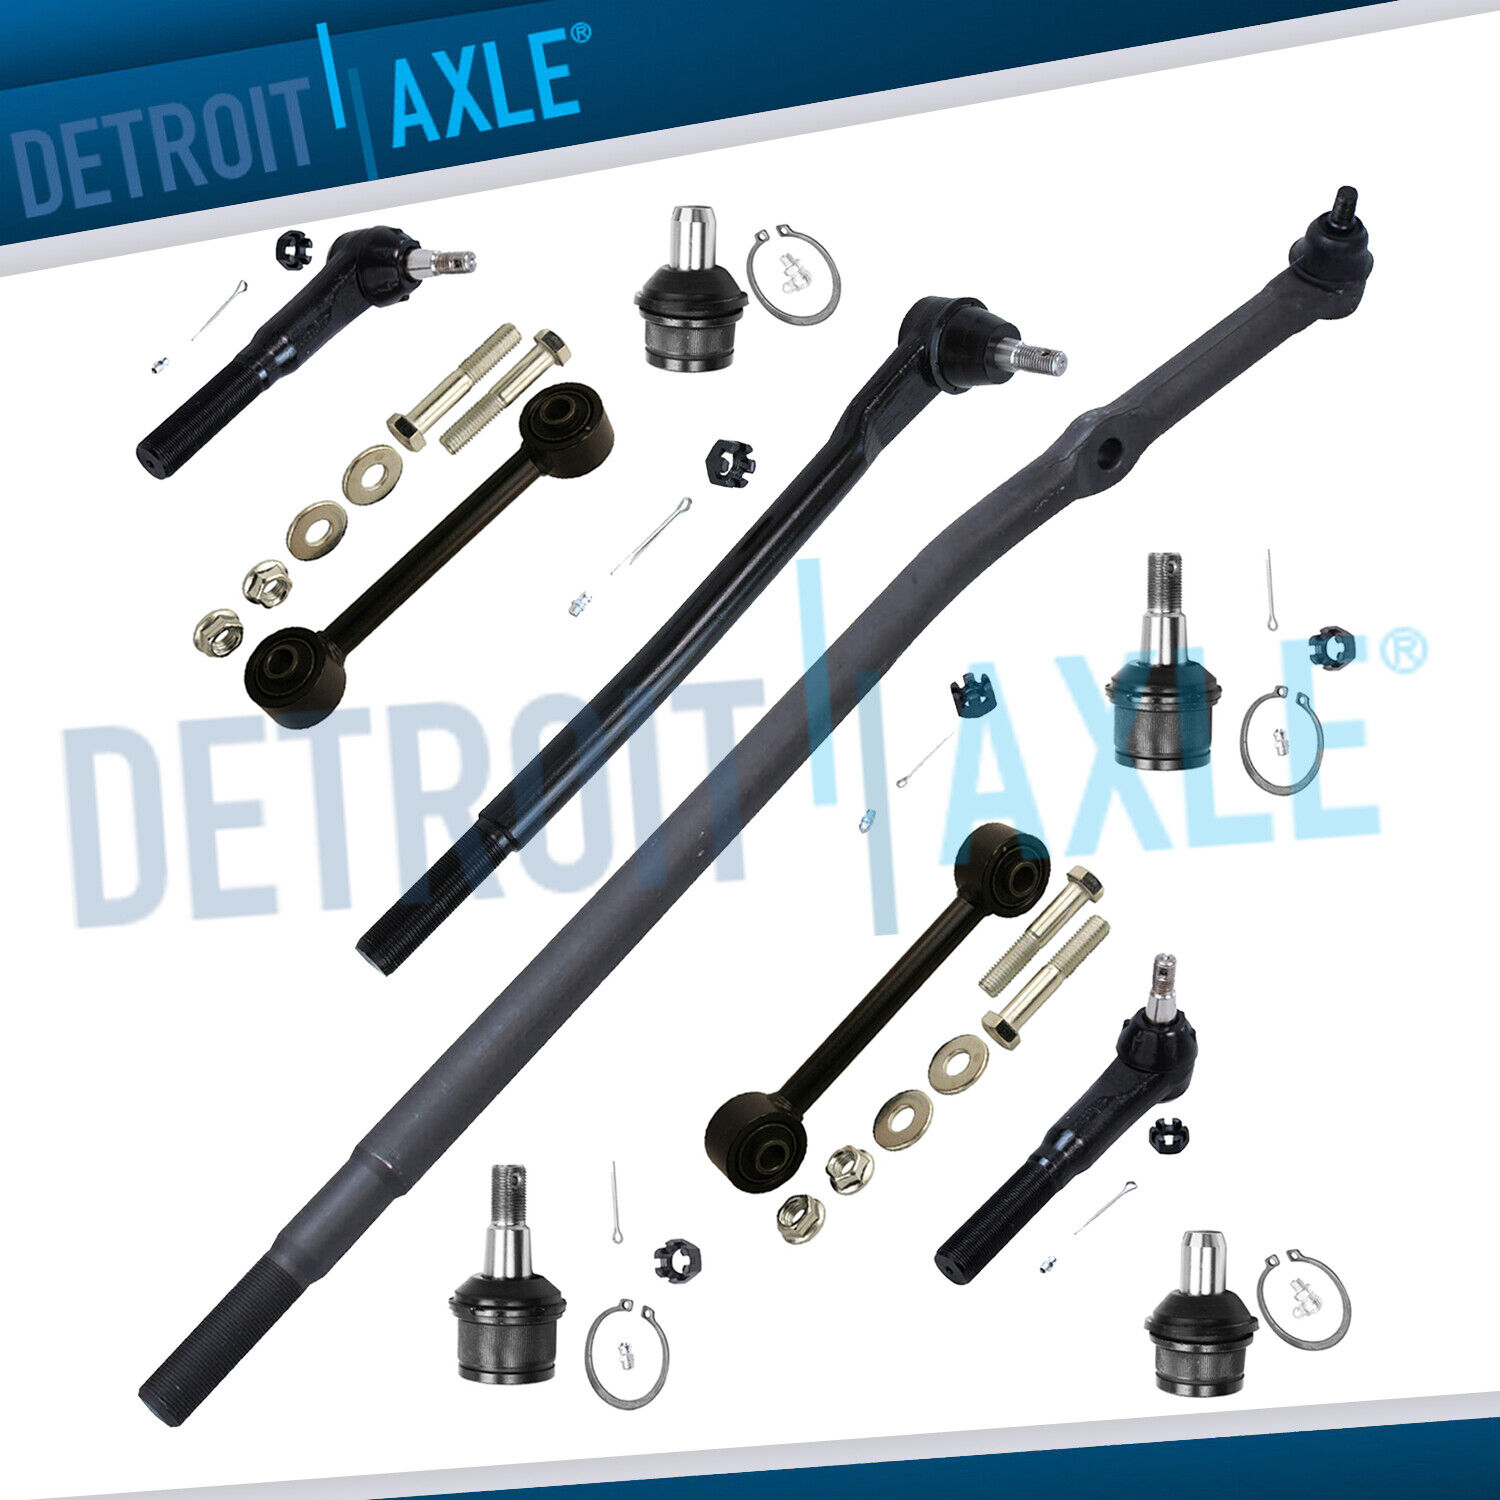 2WD 10pc Complete Front Suspension Kit for 99-04 Ford Excursion F-250 F-350 SD